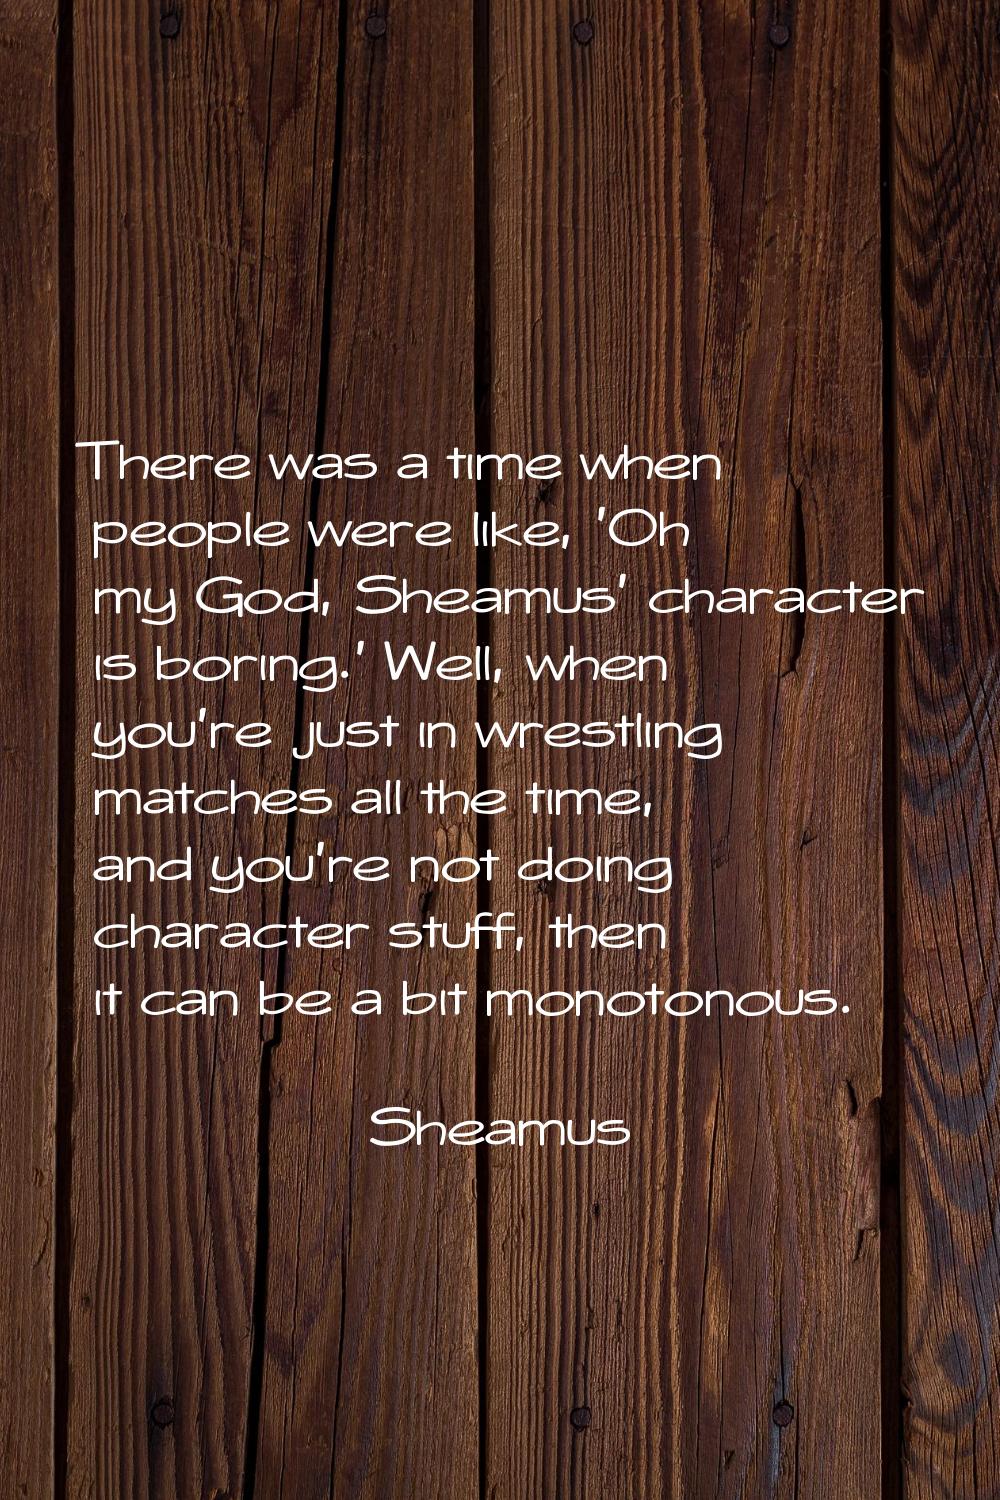 There was a time when people were like, 'Oh my God, Sheamus' character is boring.' Well, when you'r